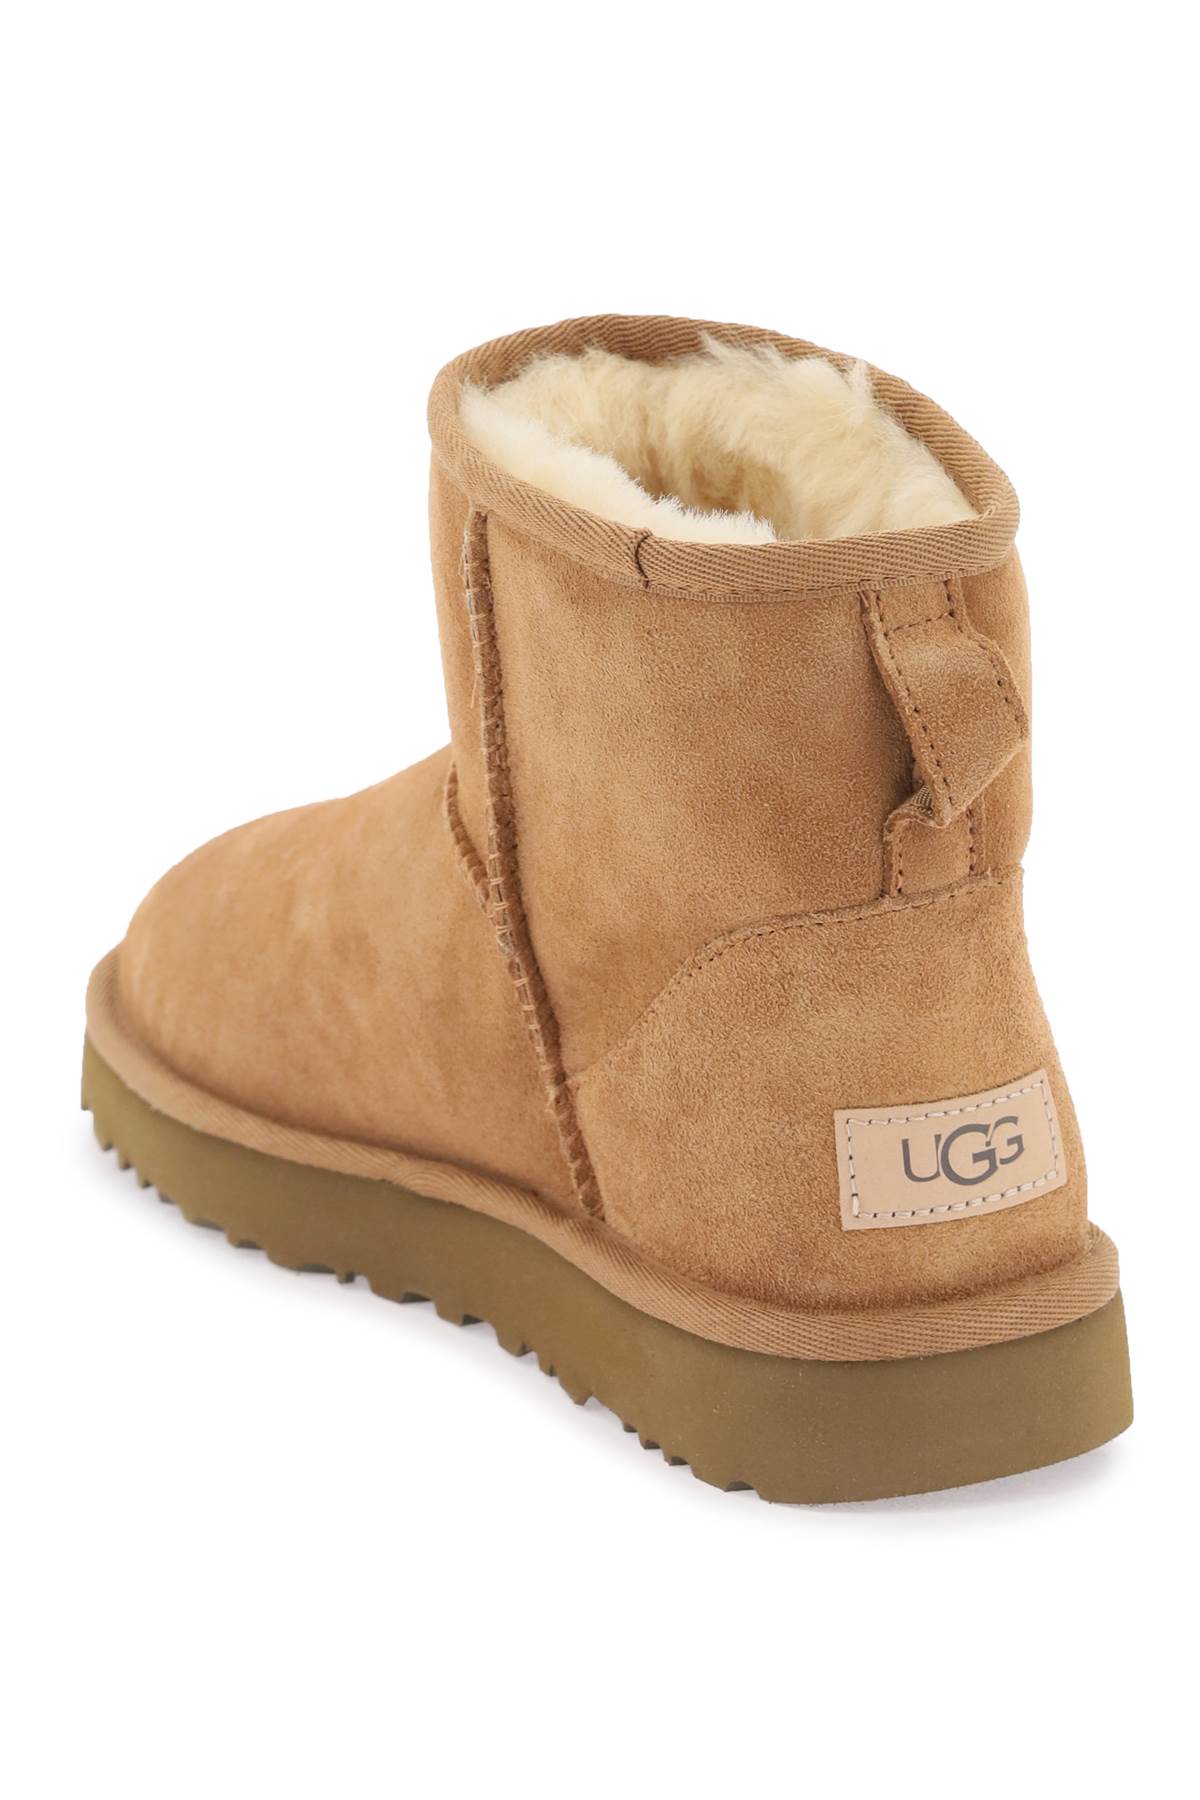 Shop Ugg Classic Mini Ii Ankle Boots In Che Chestnut